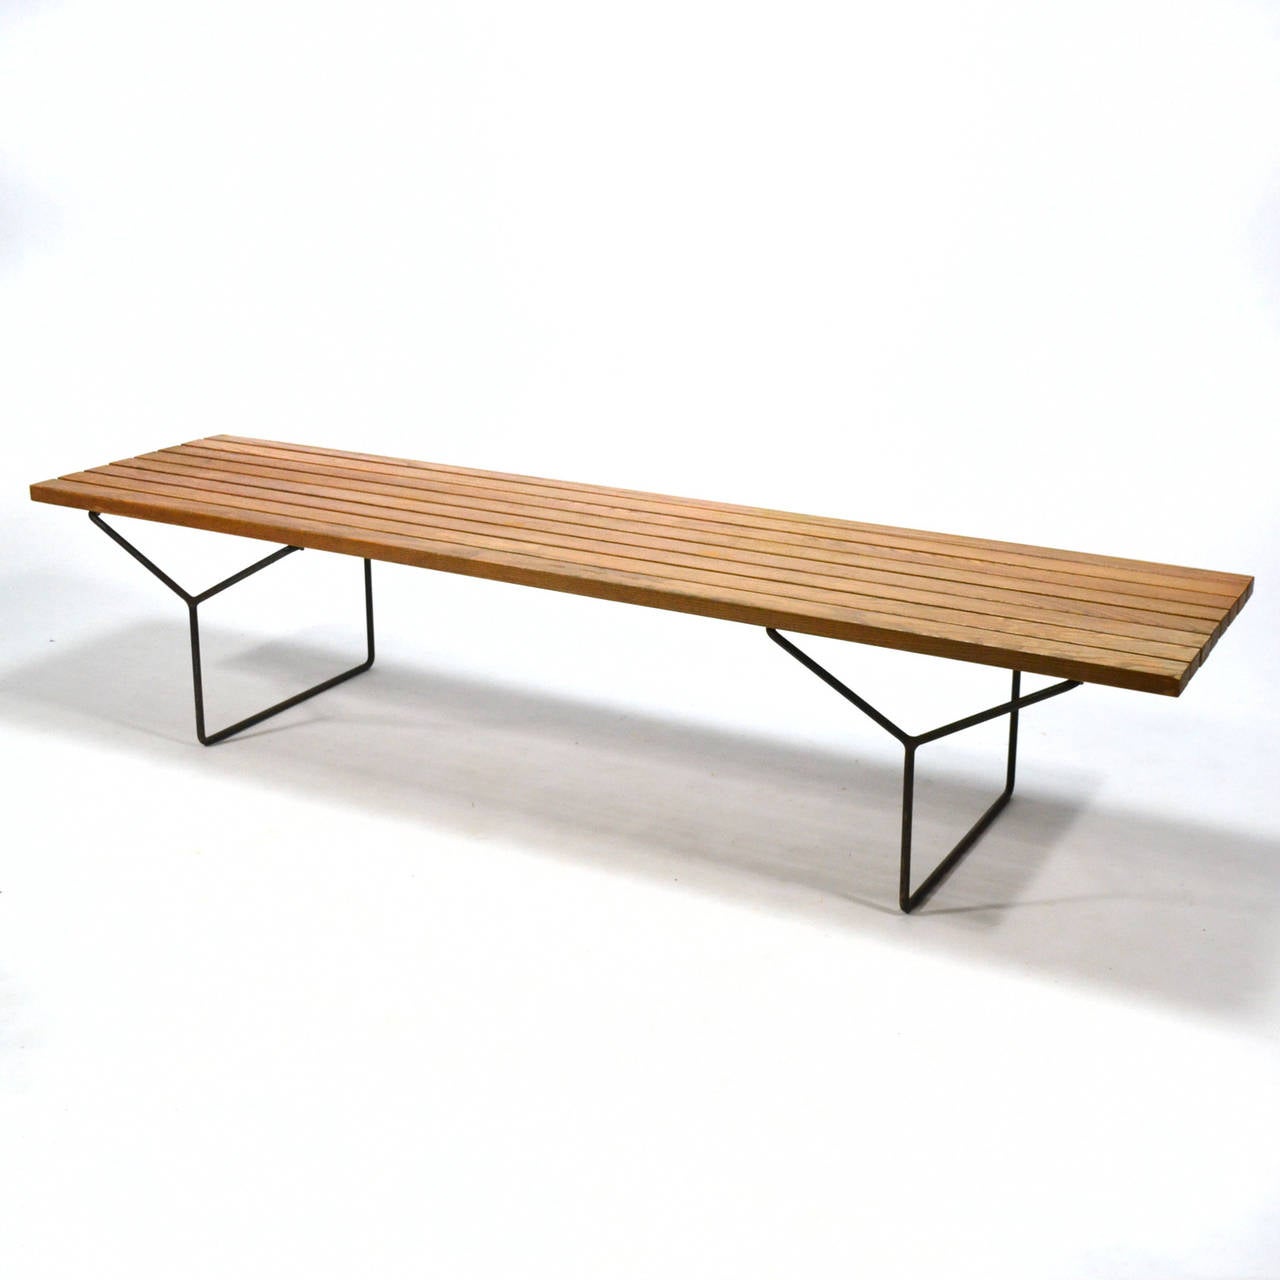 Painted Early Harry Bertoia Slat Bench by Knoll